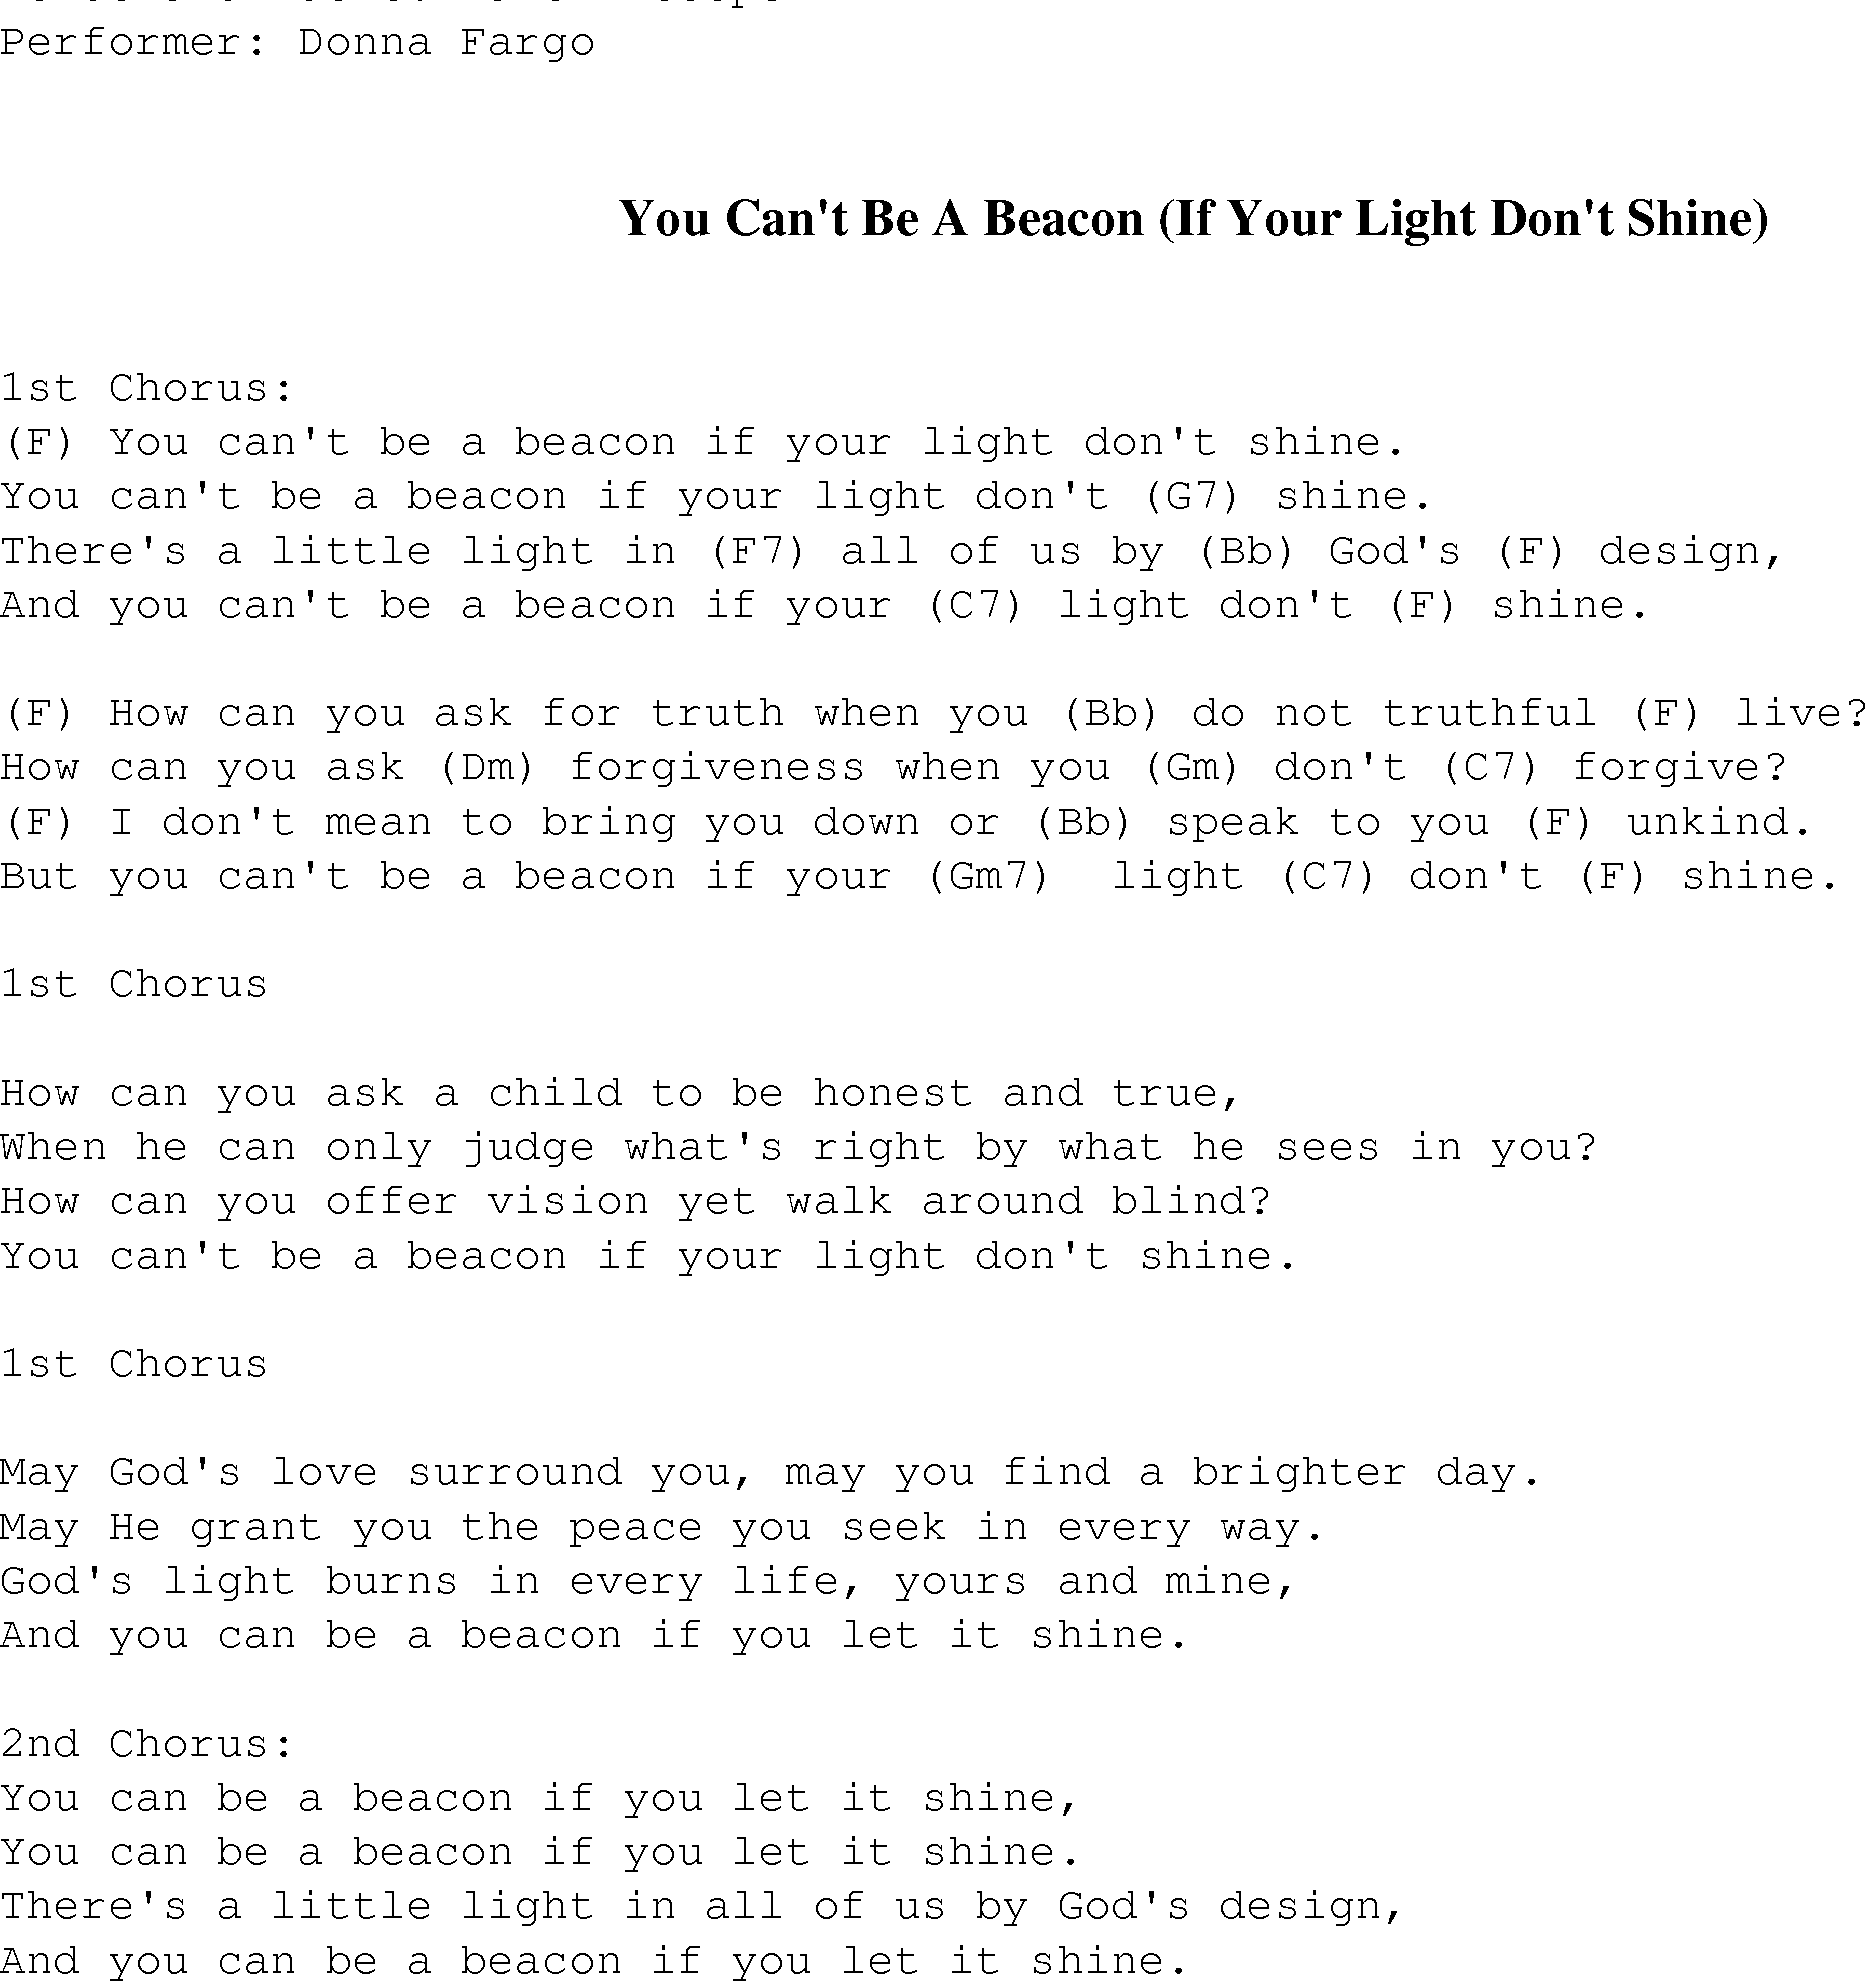 Gospel Song: you_can_be_a_beacon, lyrics and chords.